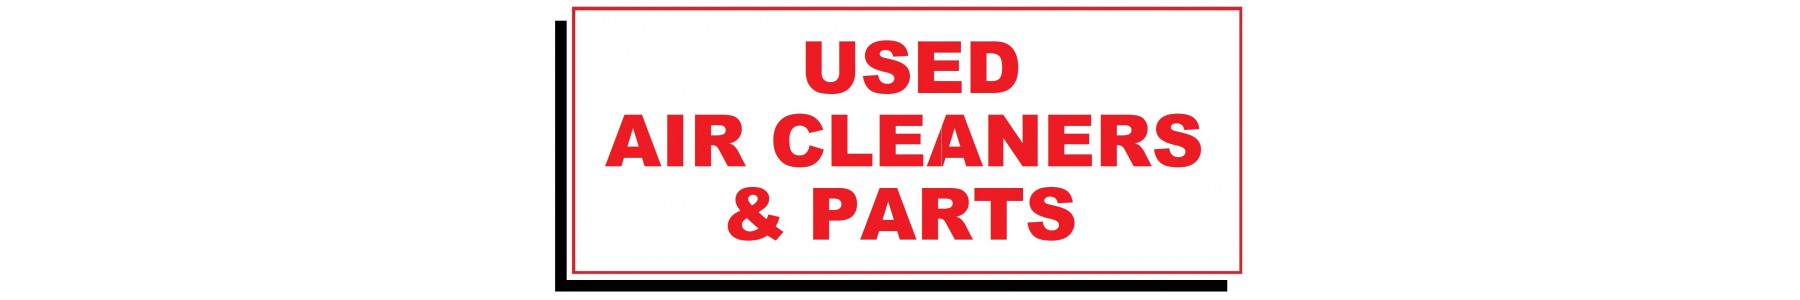 USED AIR CLEANERS & PARTS